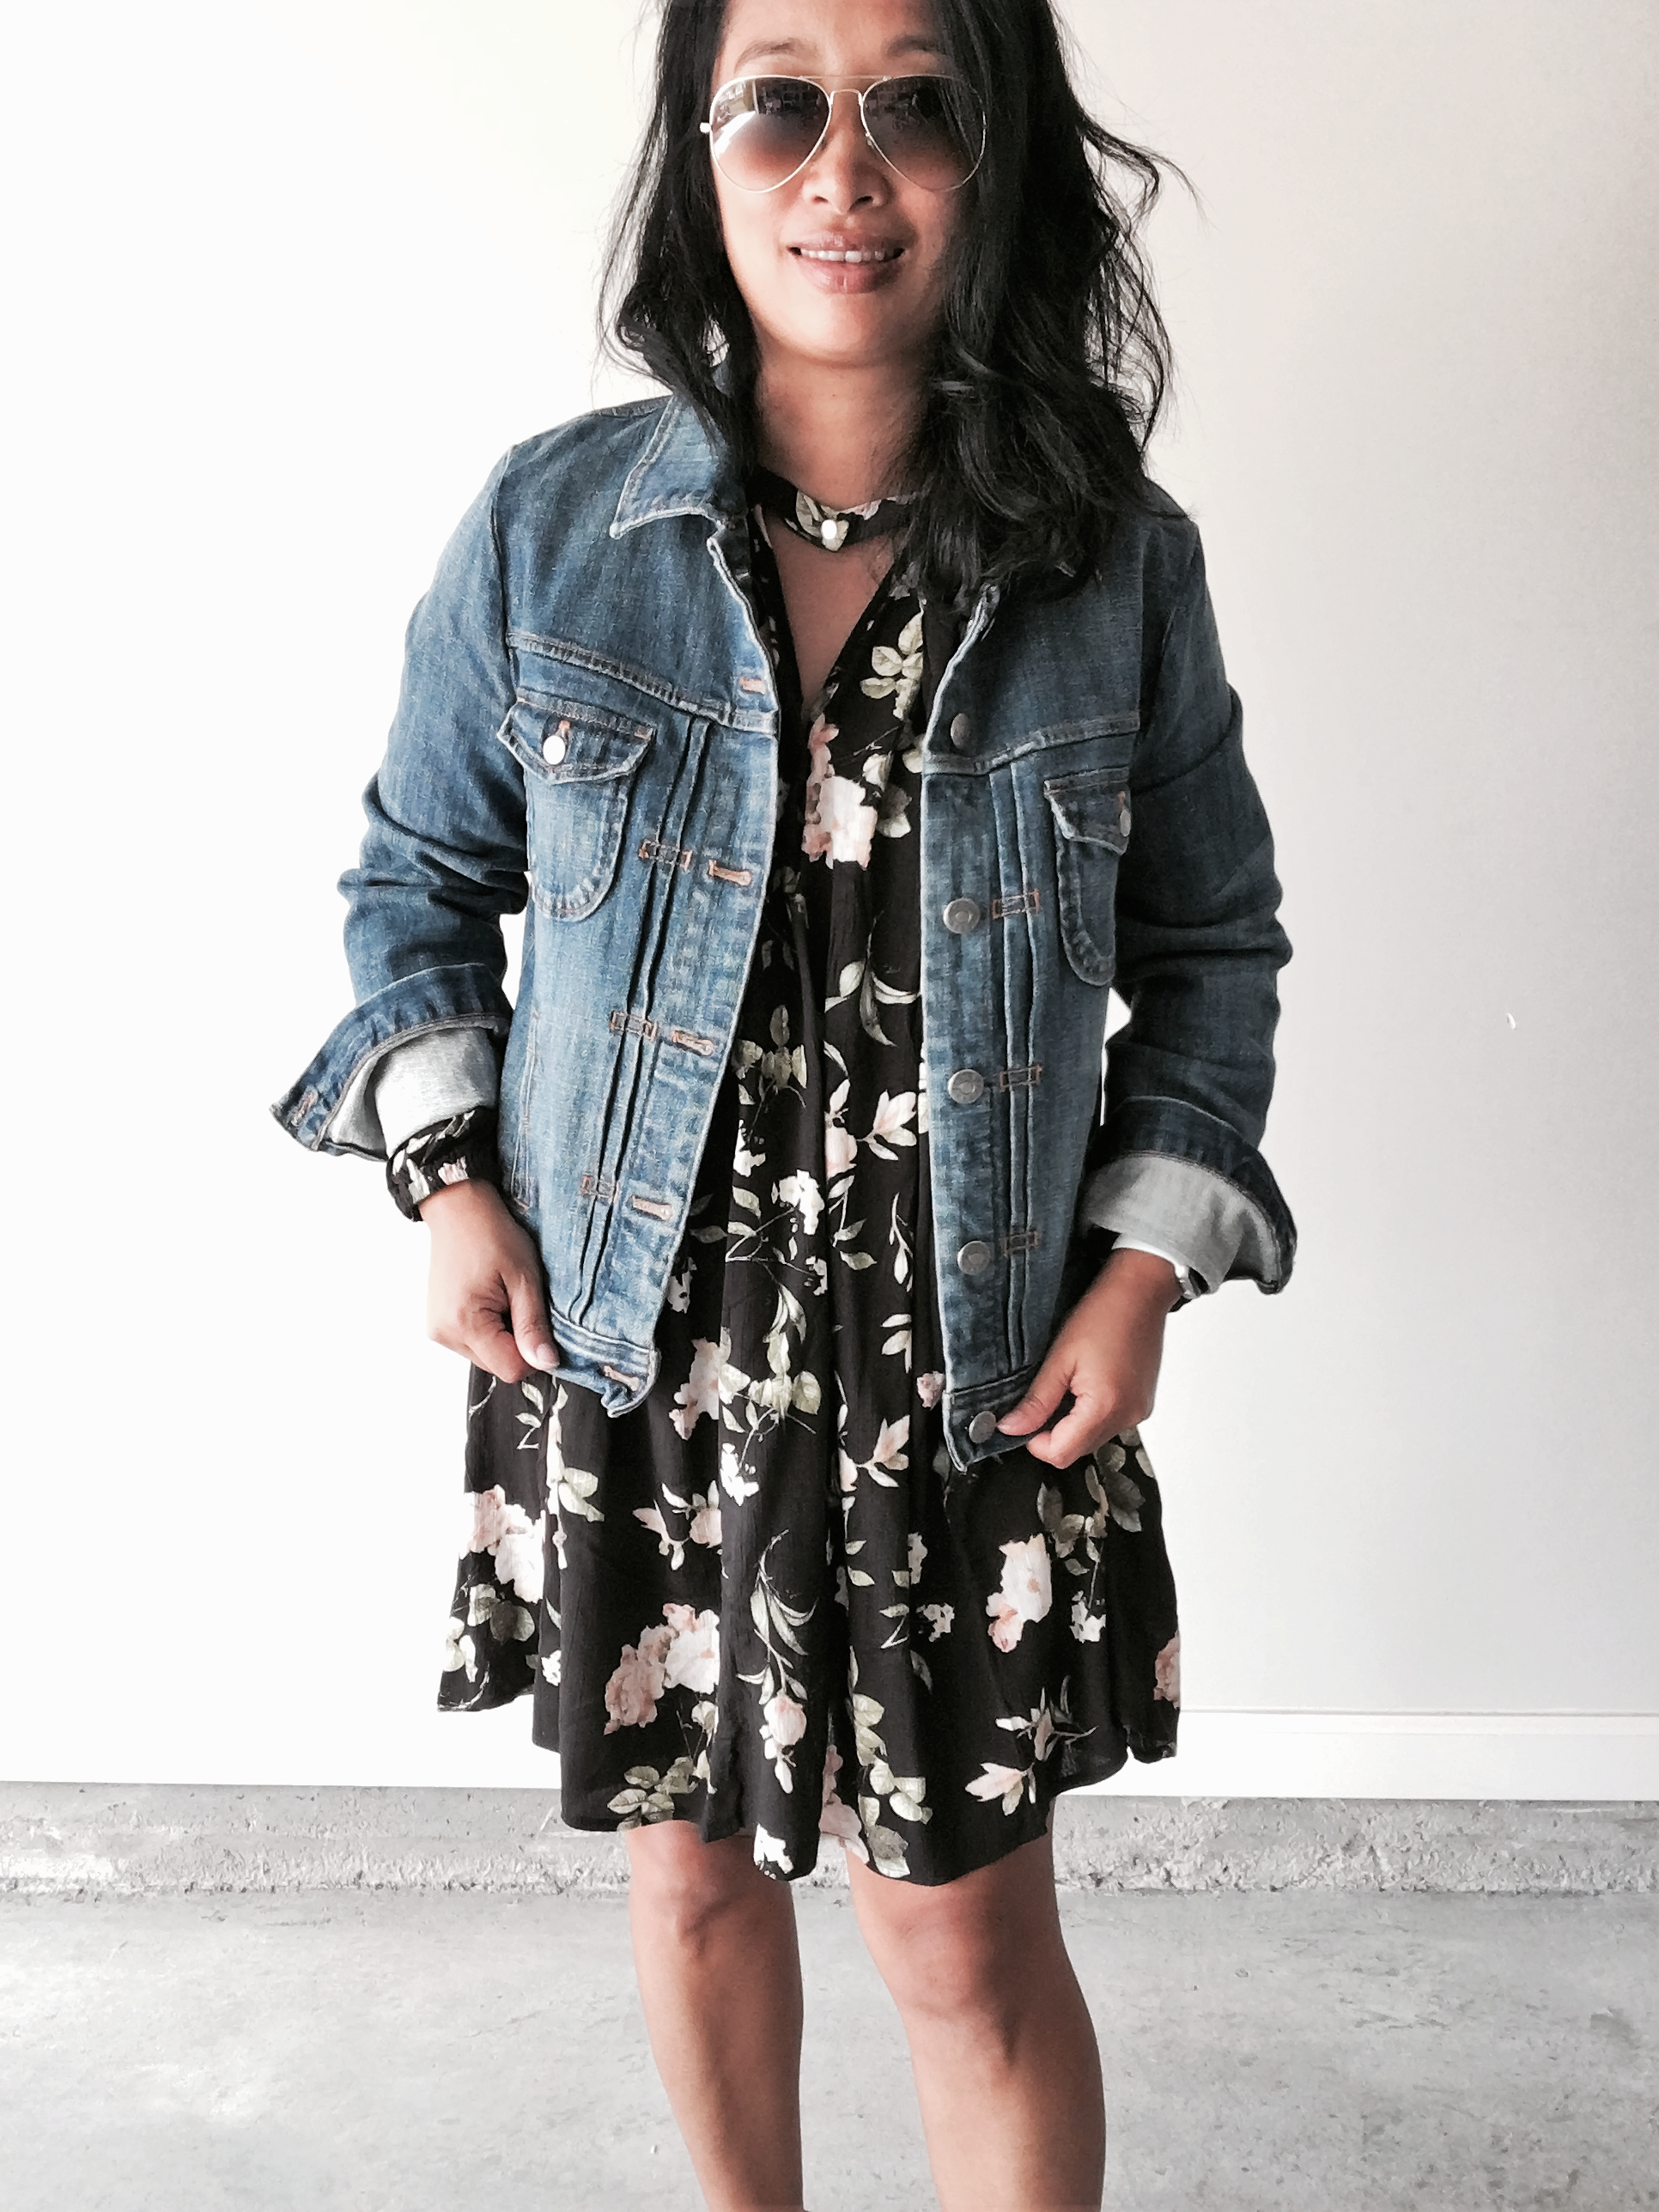 3 Ways to Style a Floral Dress for Fall